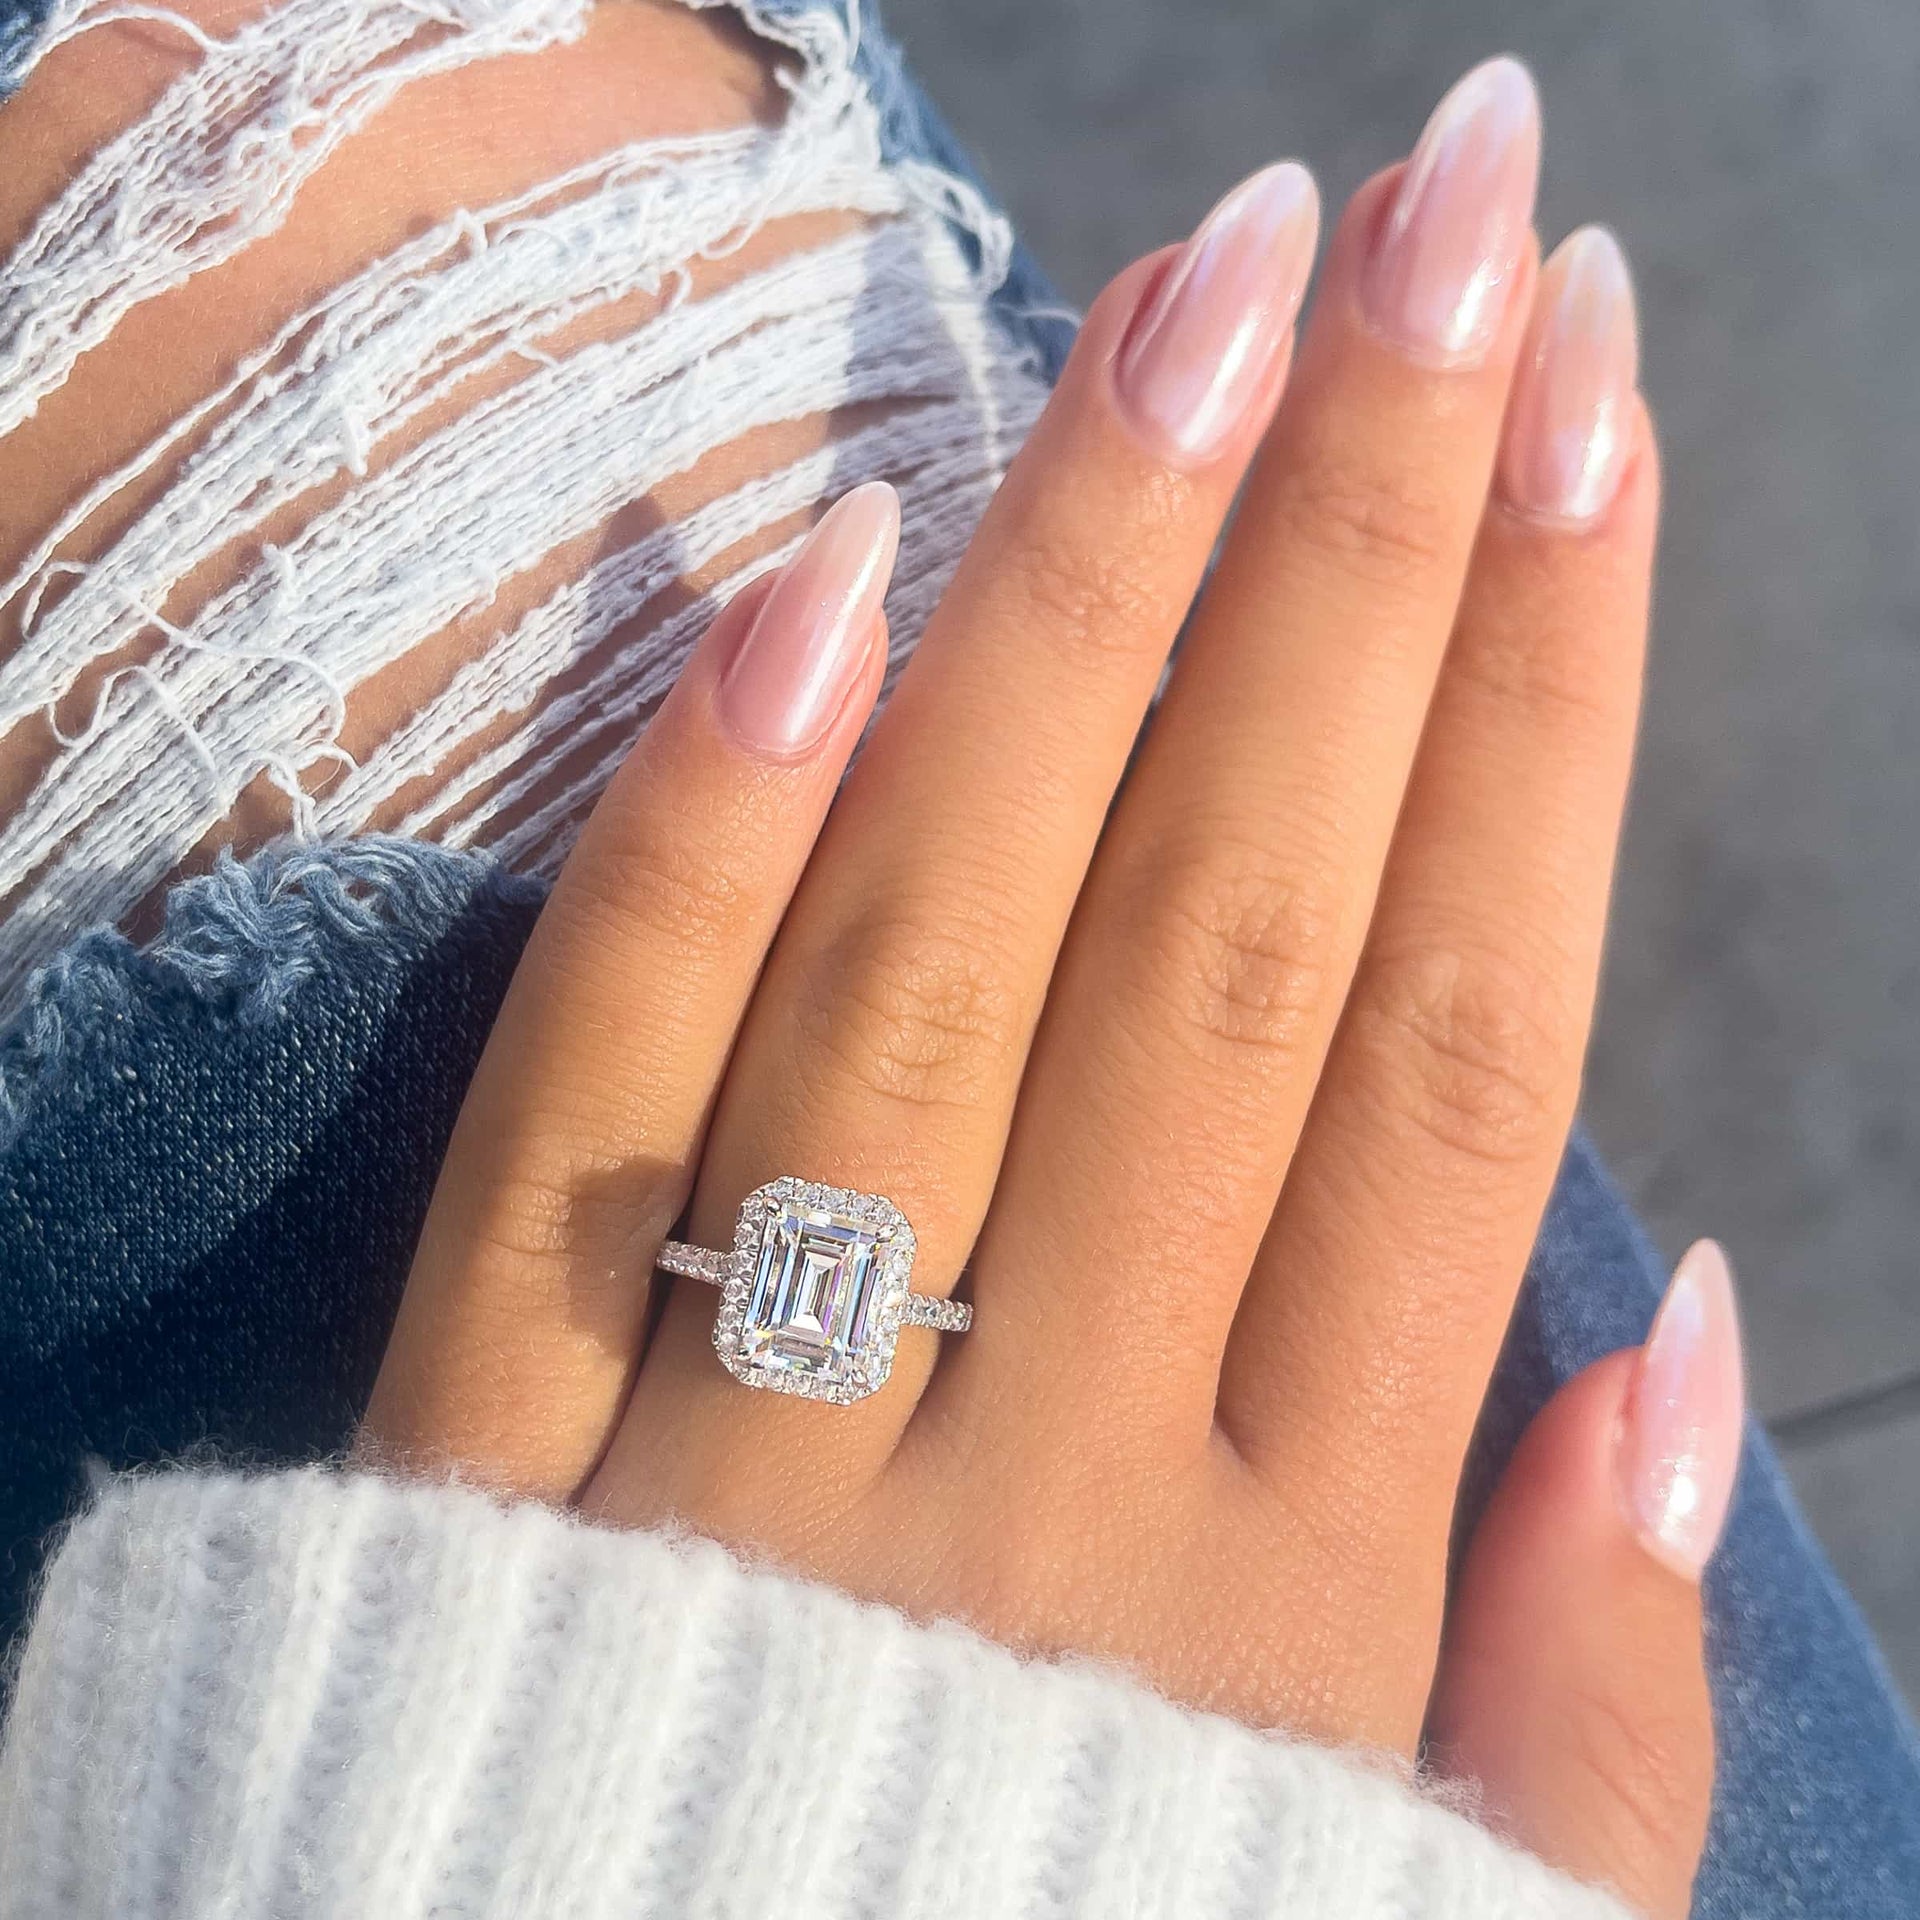 silver halo emerald cut engagement ring on ladies hand with blue jeans in background